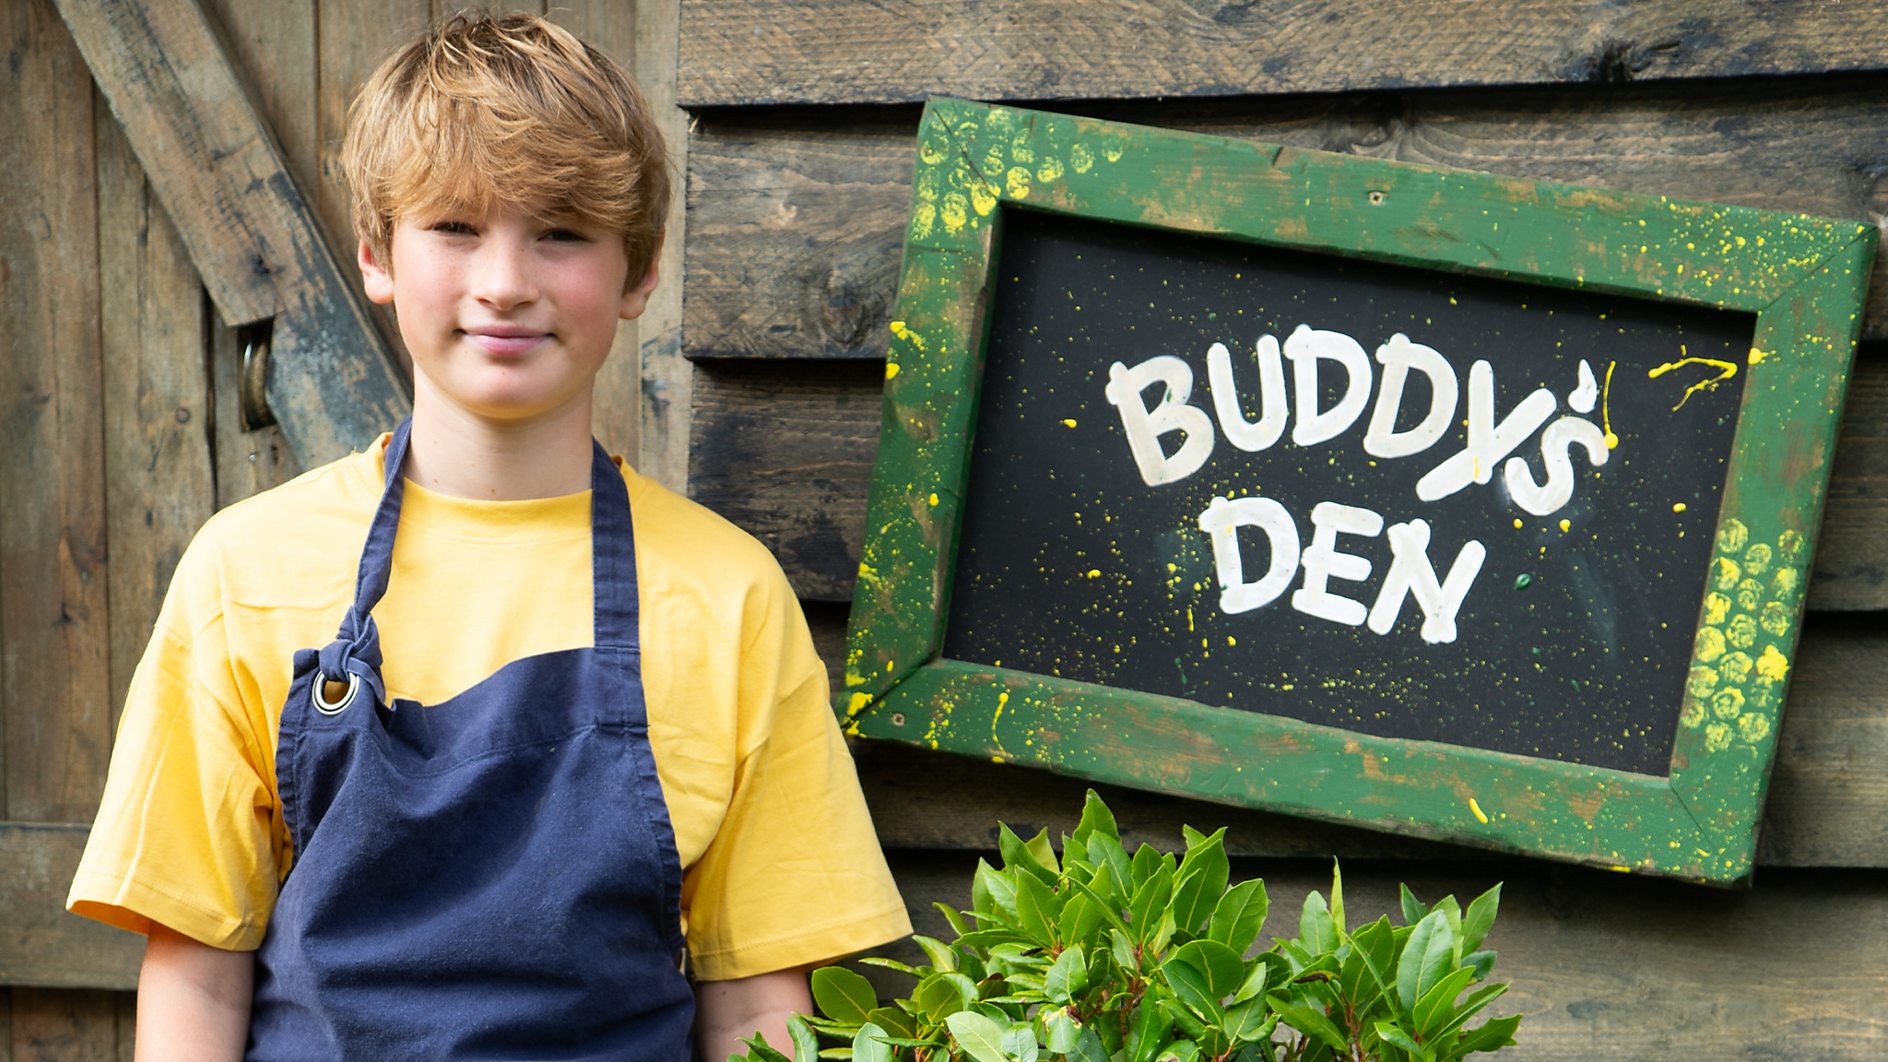 Interview with Buddy Oliver, Jamie Oliver's son who will teach kids how to cook in Cooking Buddies